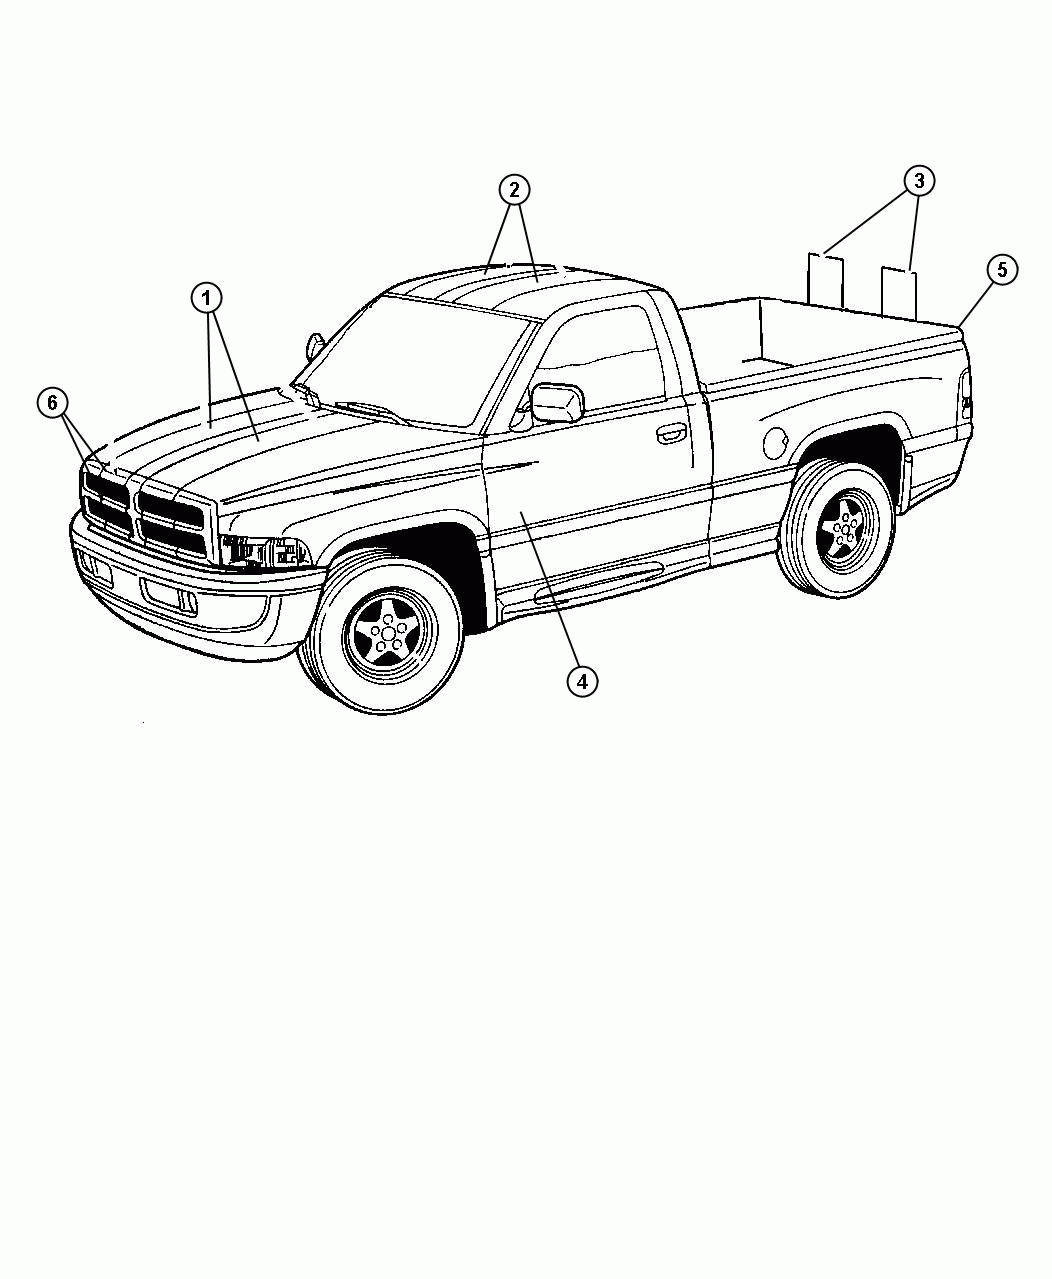 Related Dodge Truck Coloring Pages item-22361, Dodge Dakota Truck ...